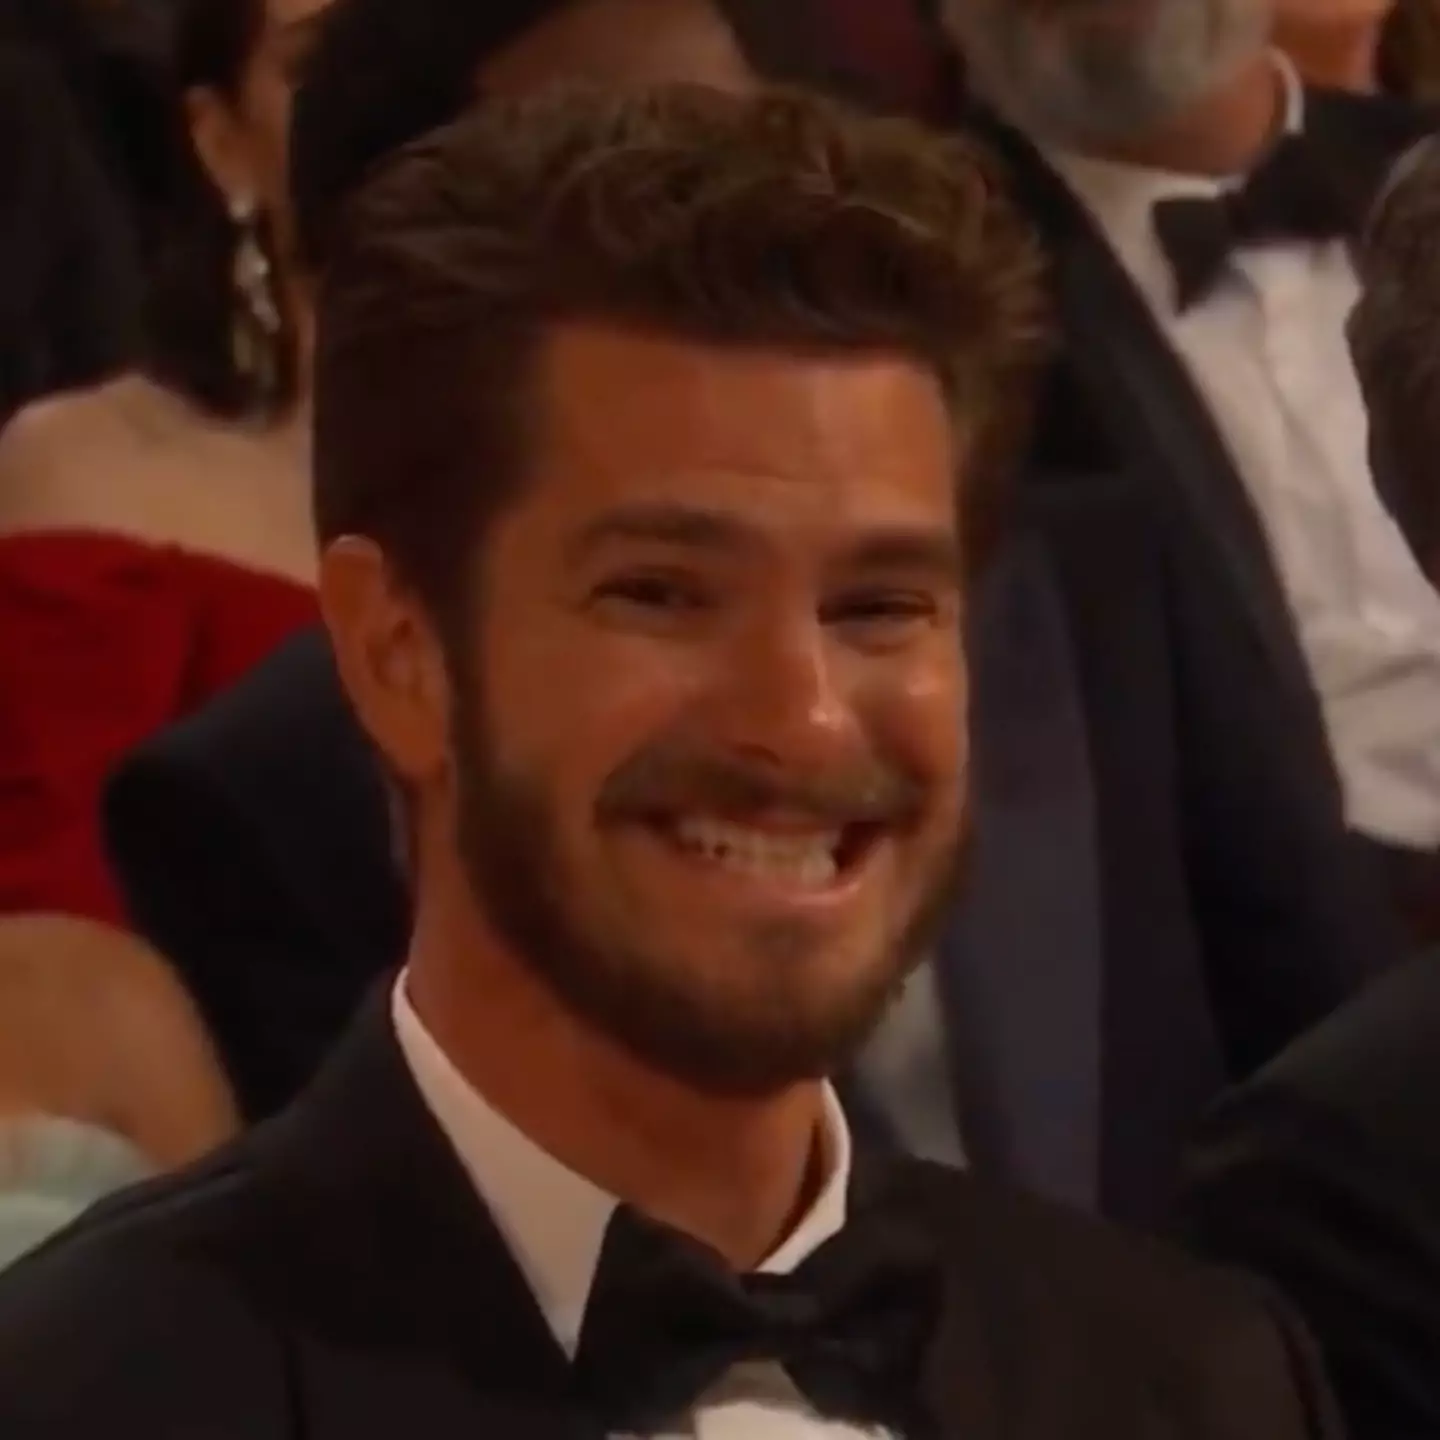 Andrew Garfield awkwardly smiled at viewers.